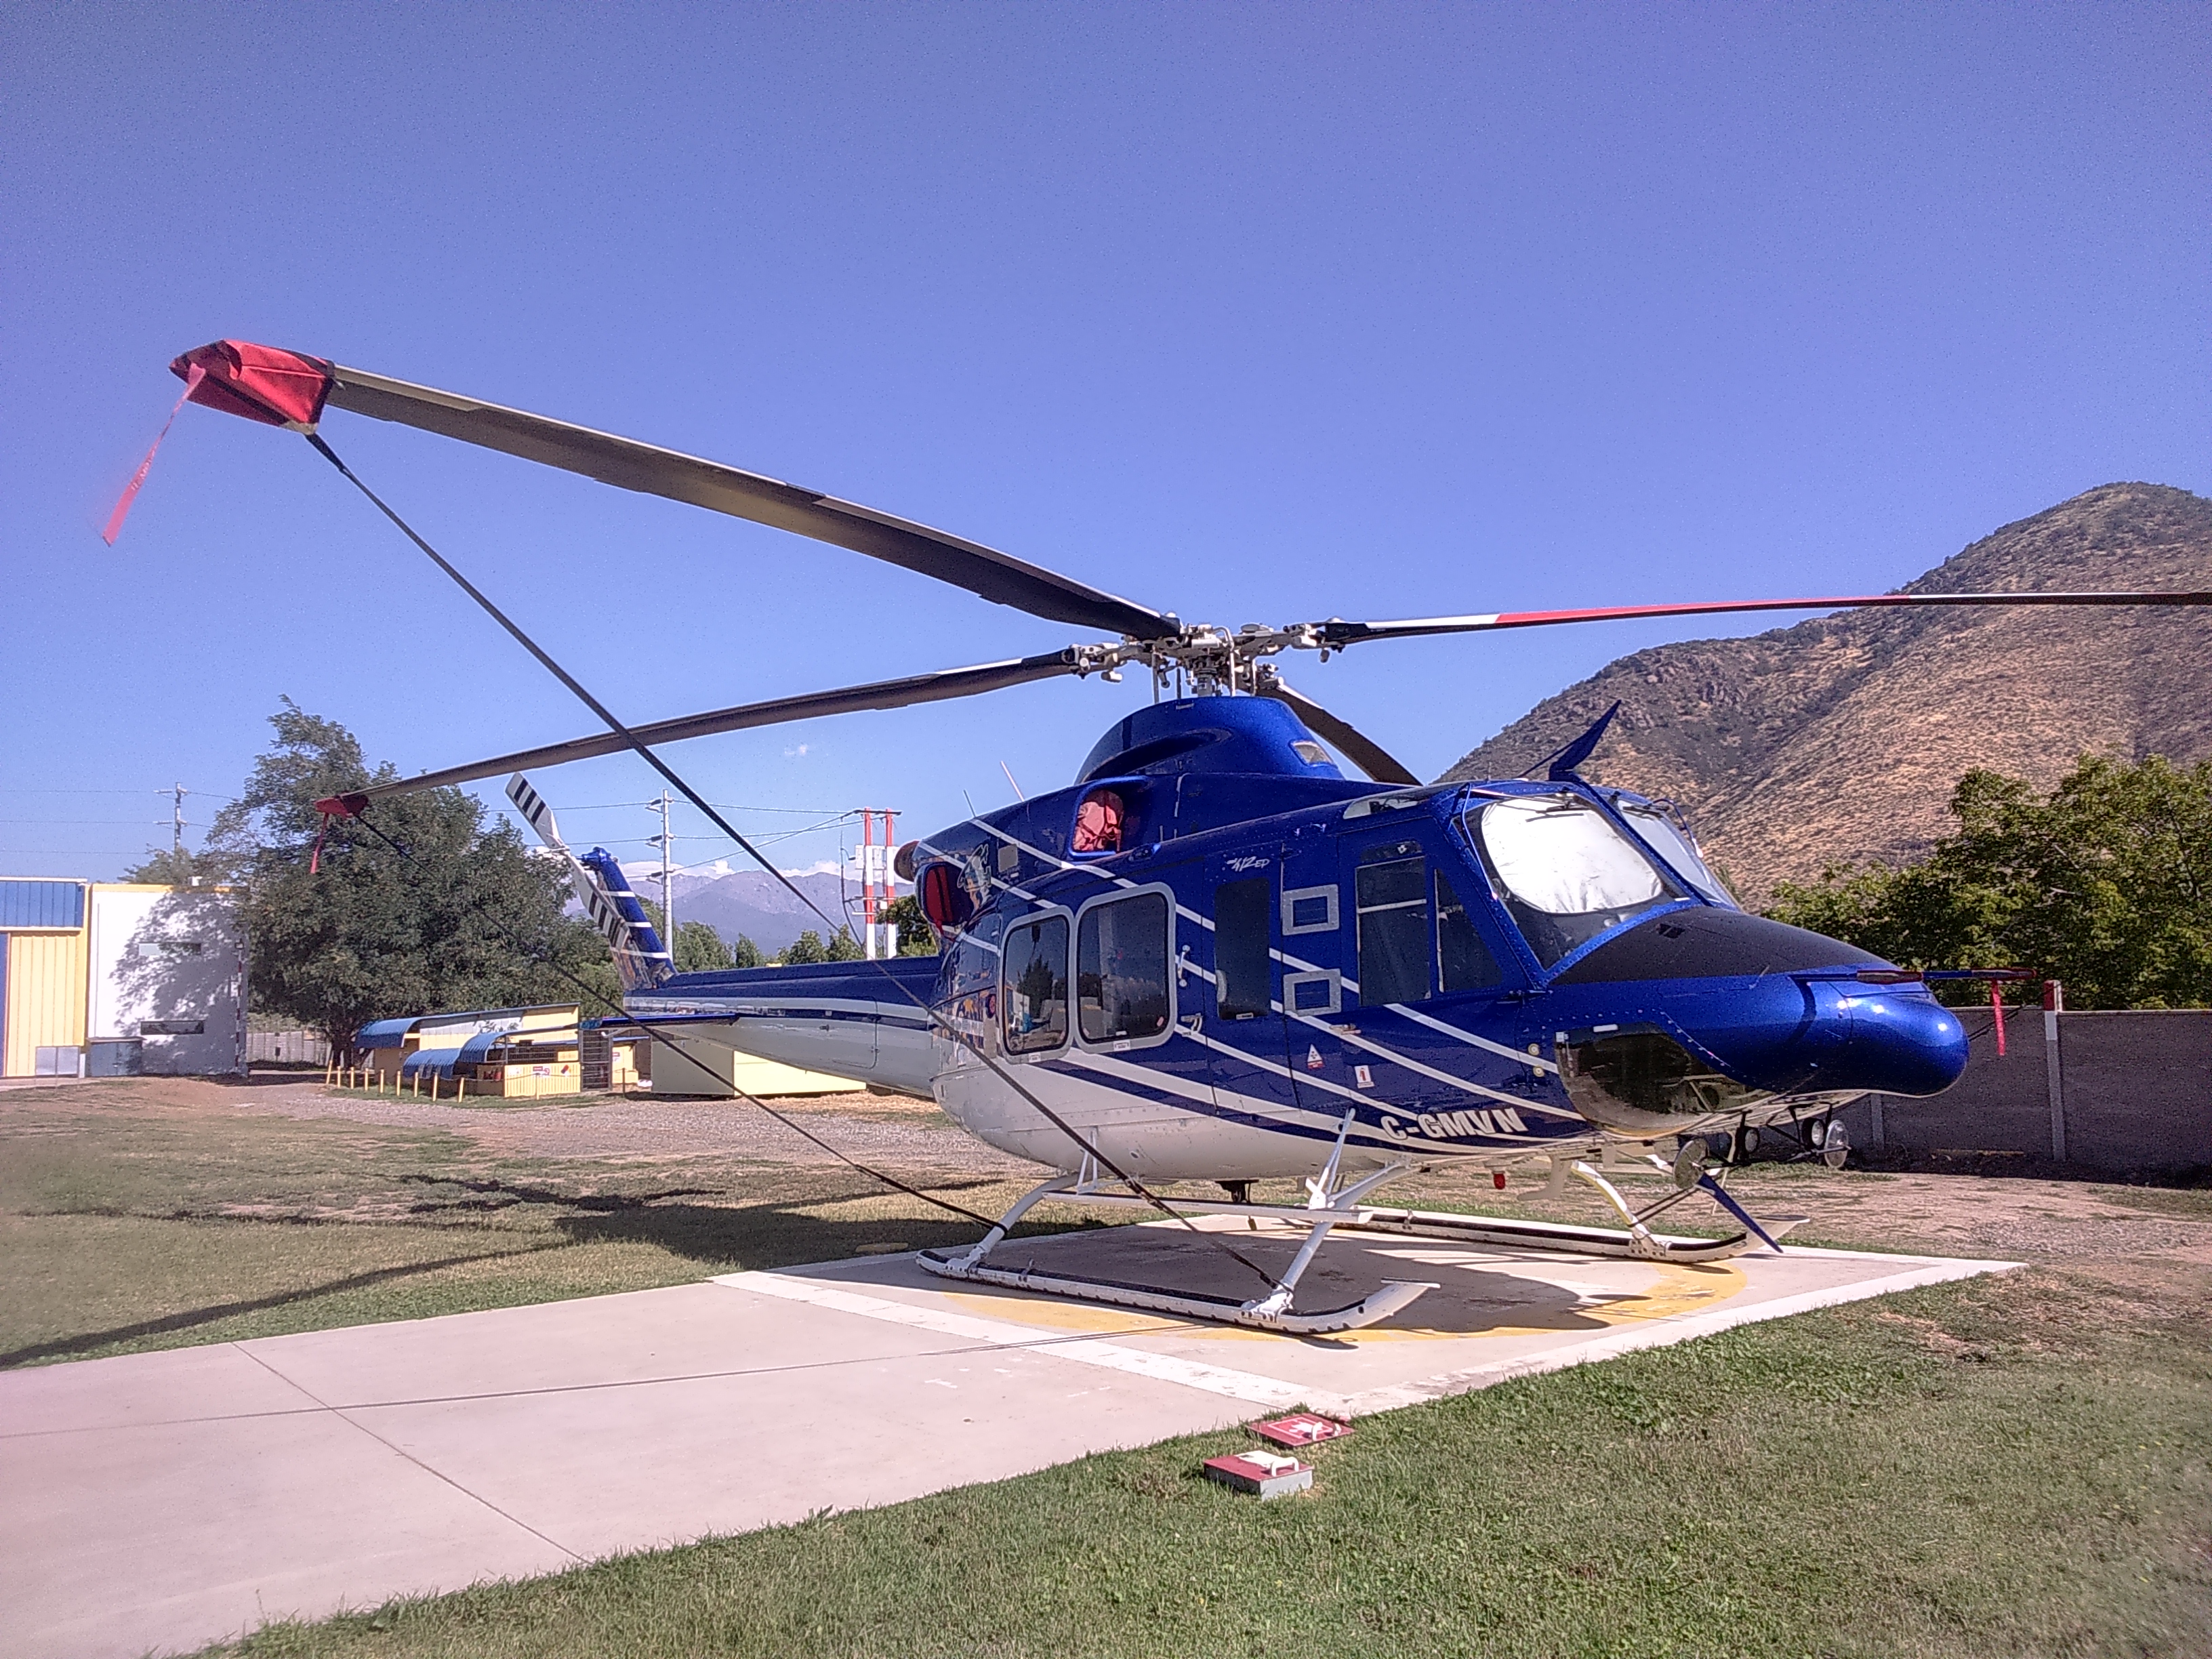 Bell 412-EP